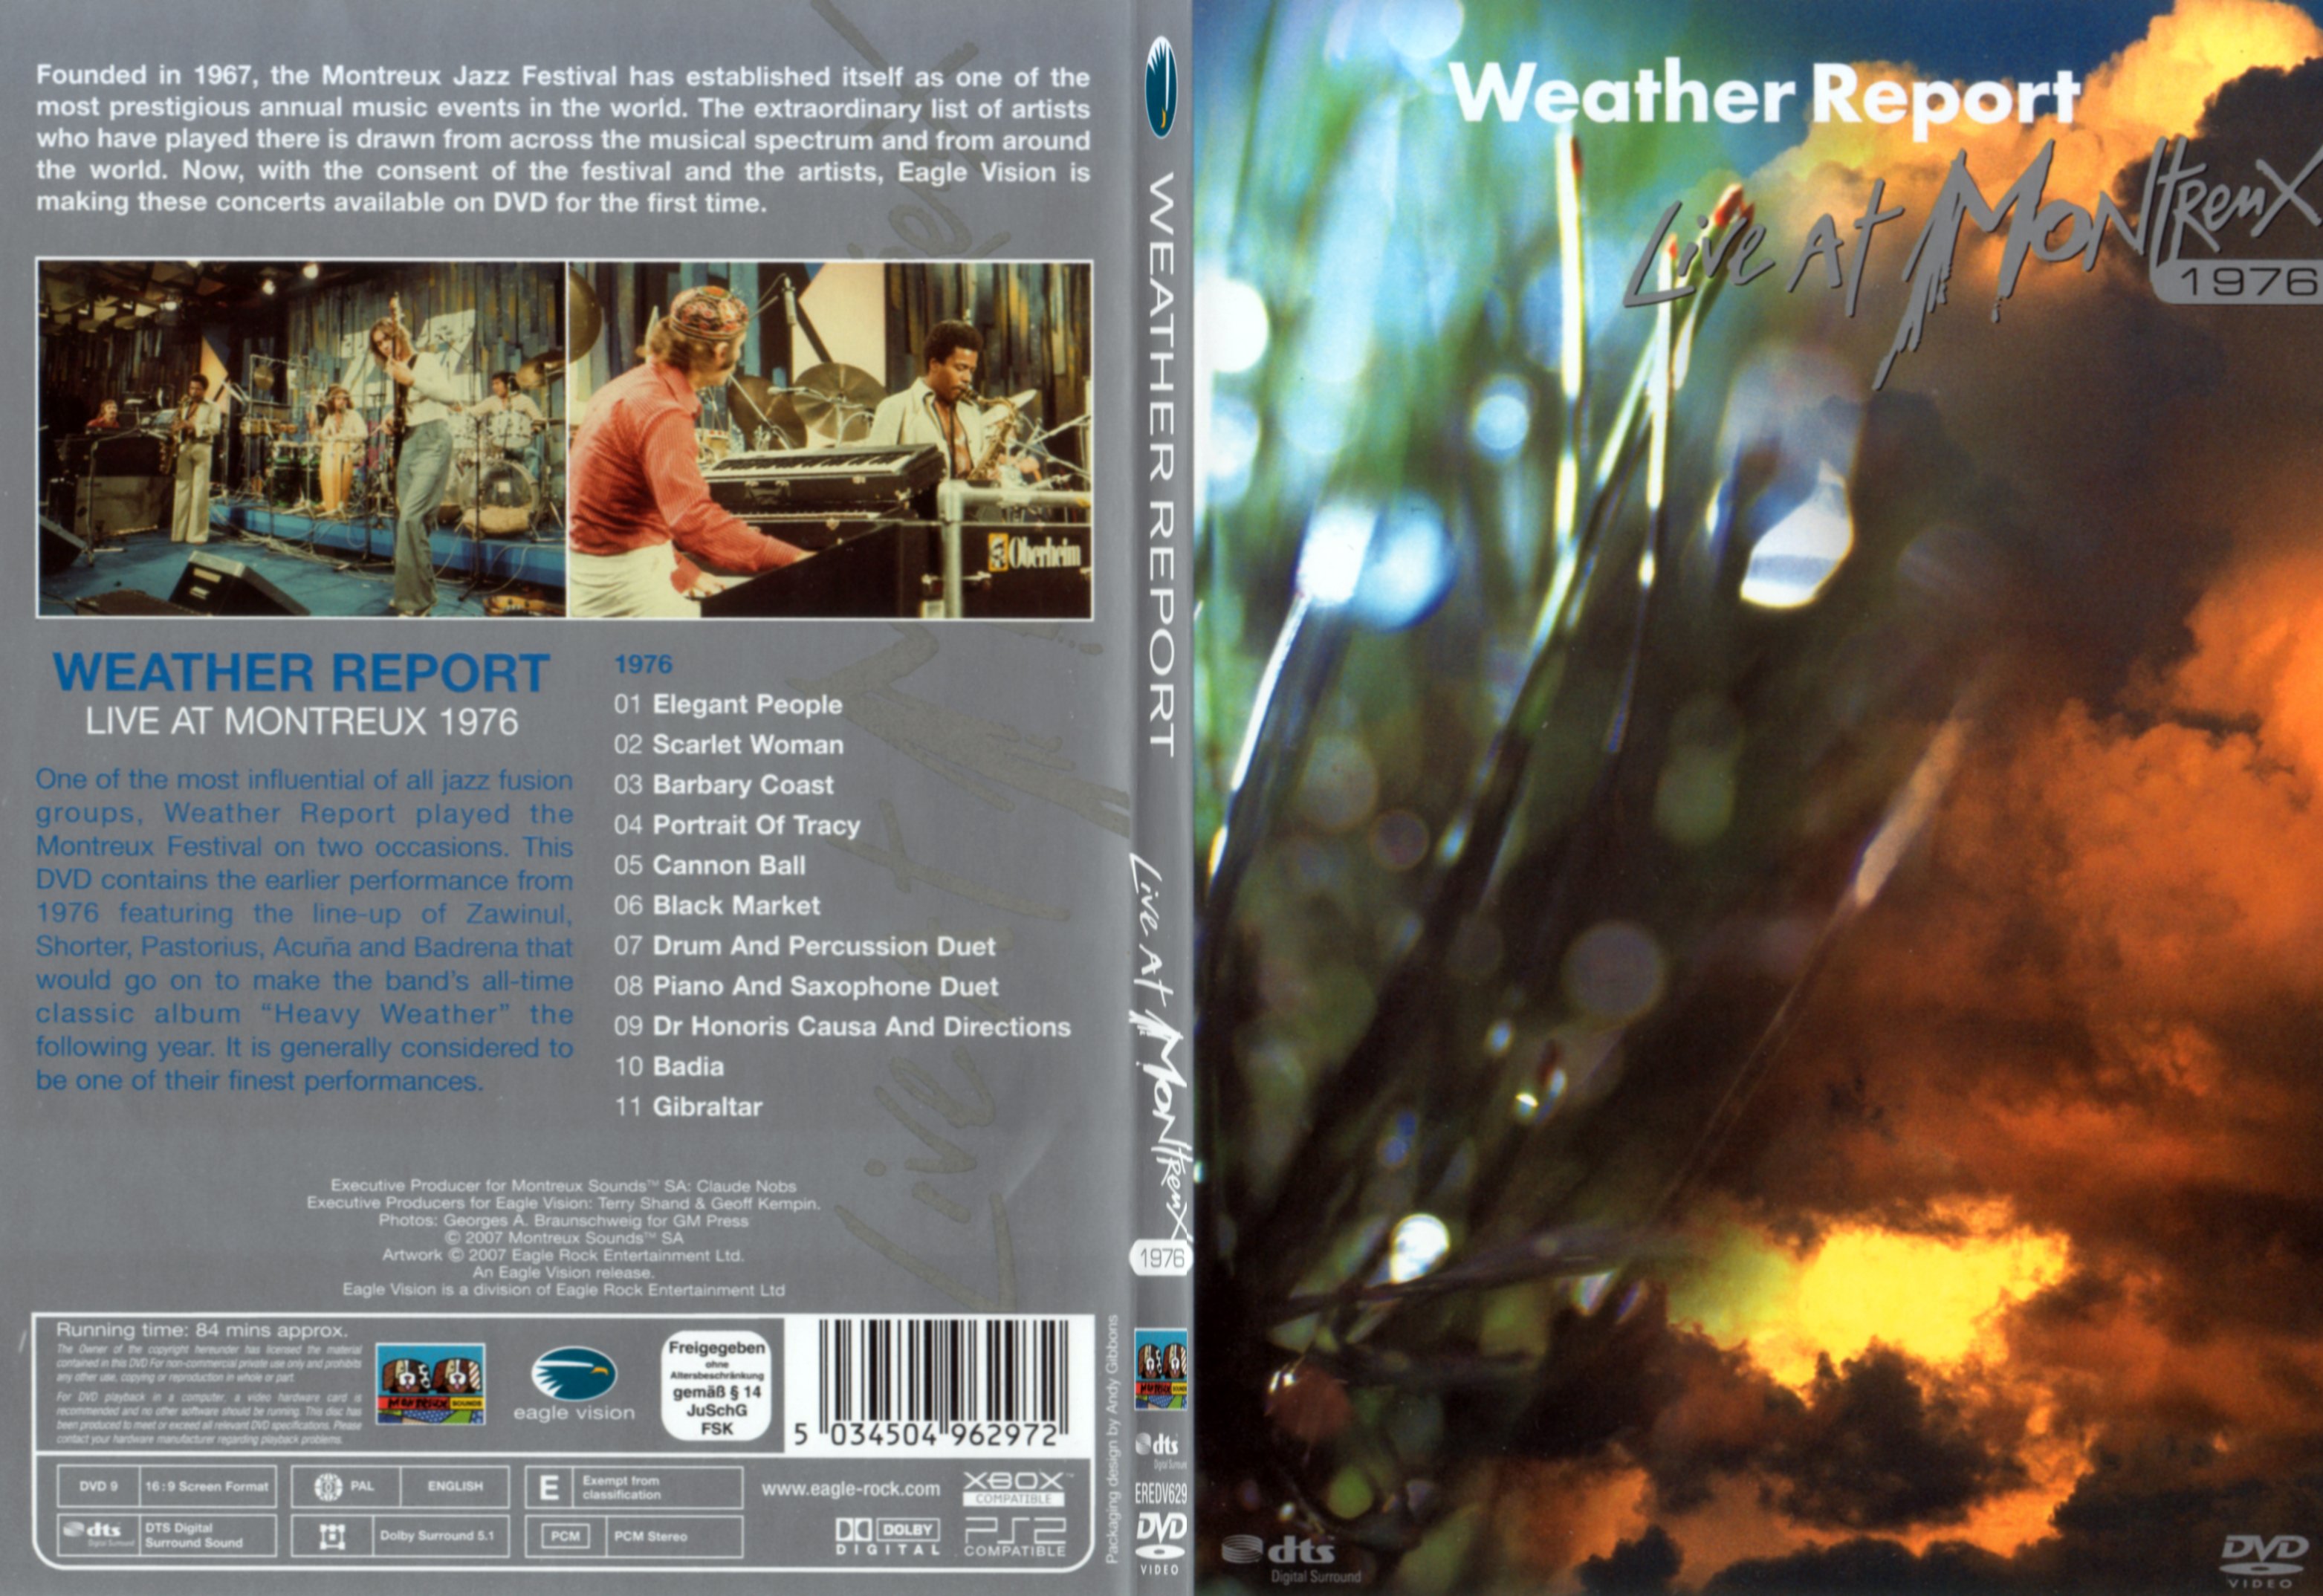 Jaquette DVD Weather Report Live at Montreux - SLIM